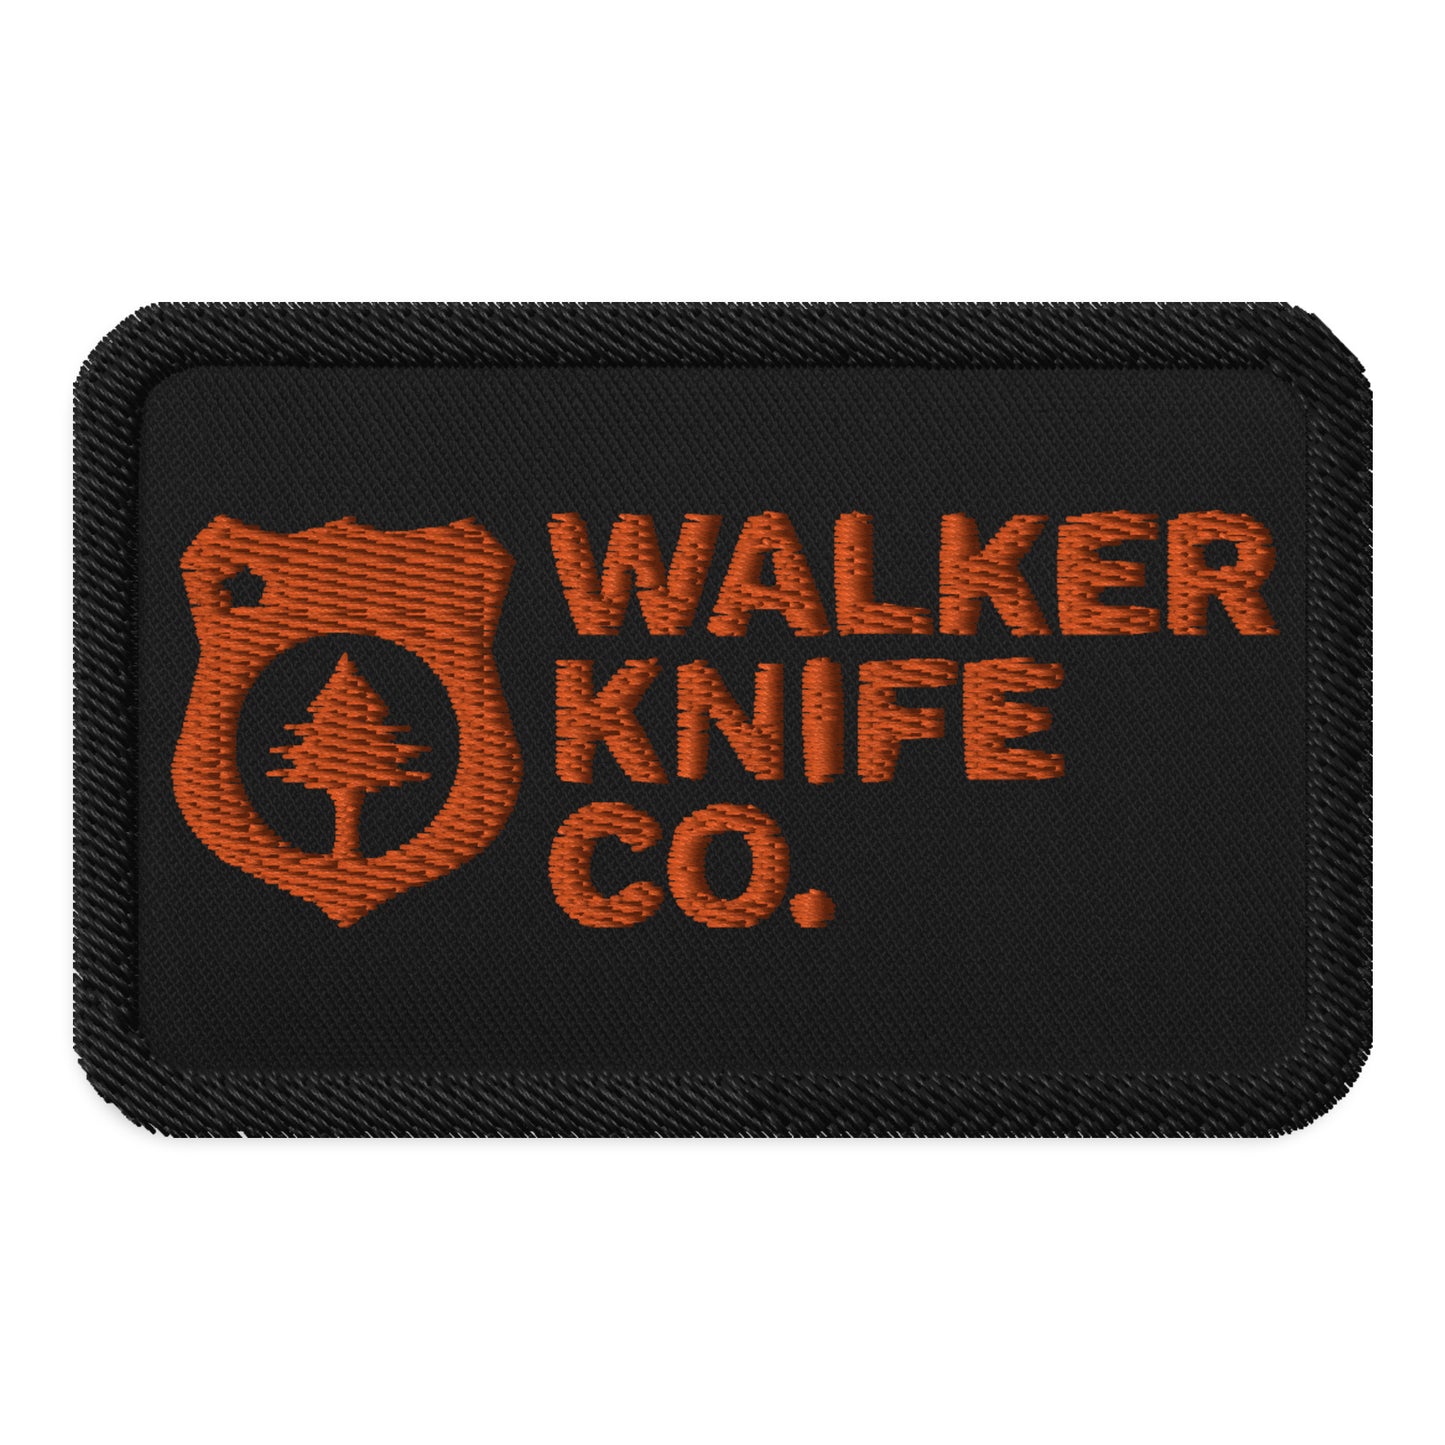 Embroidered Walker Knife Co. Patch